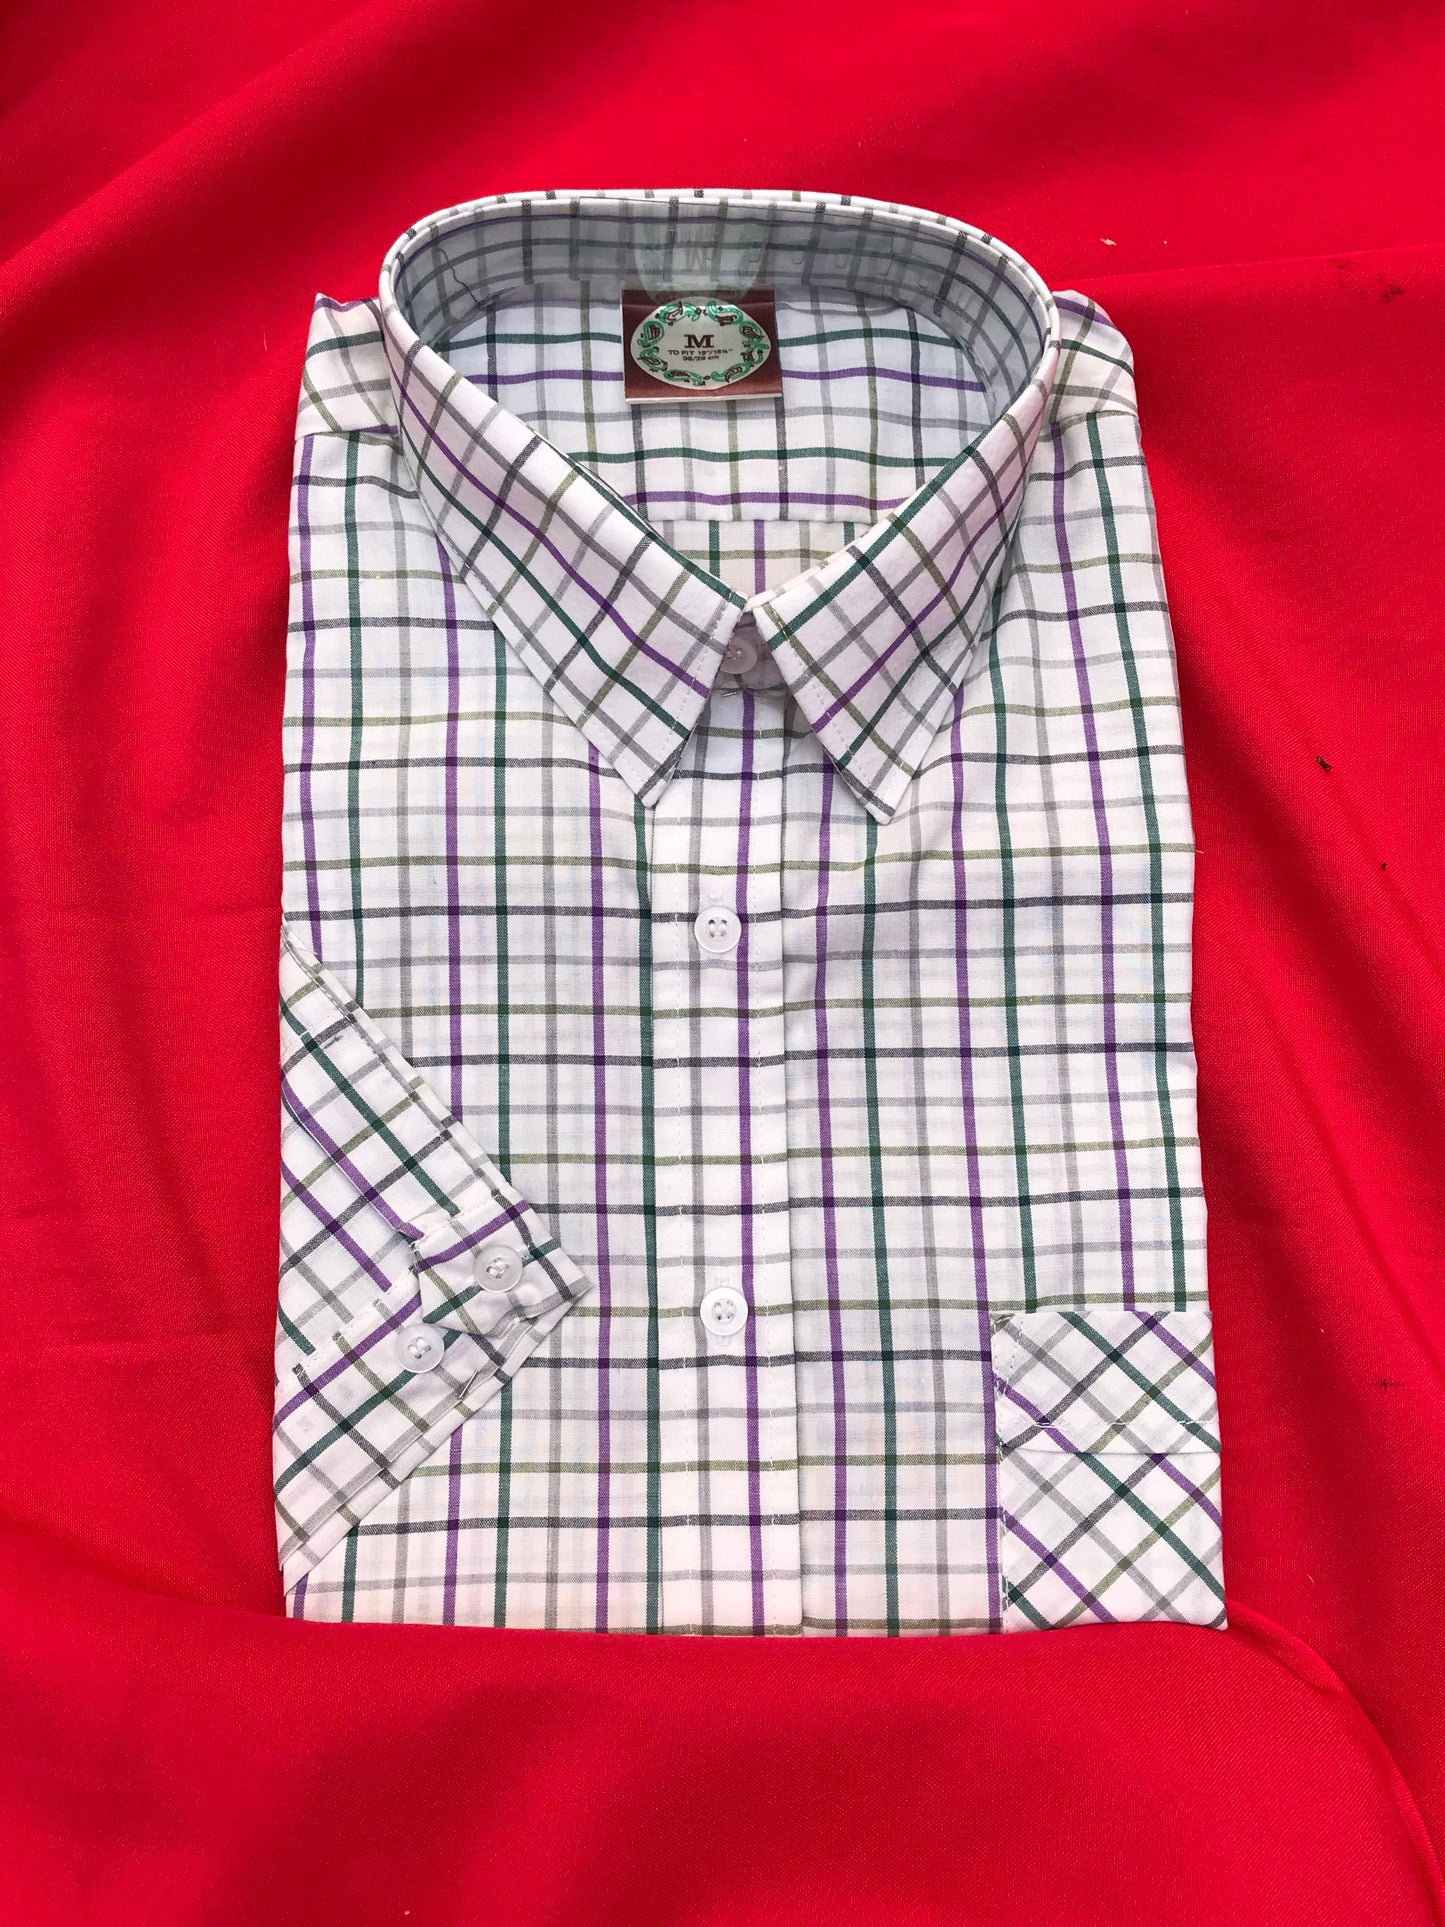 Town and country style shirt size M FREE POSTAGE